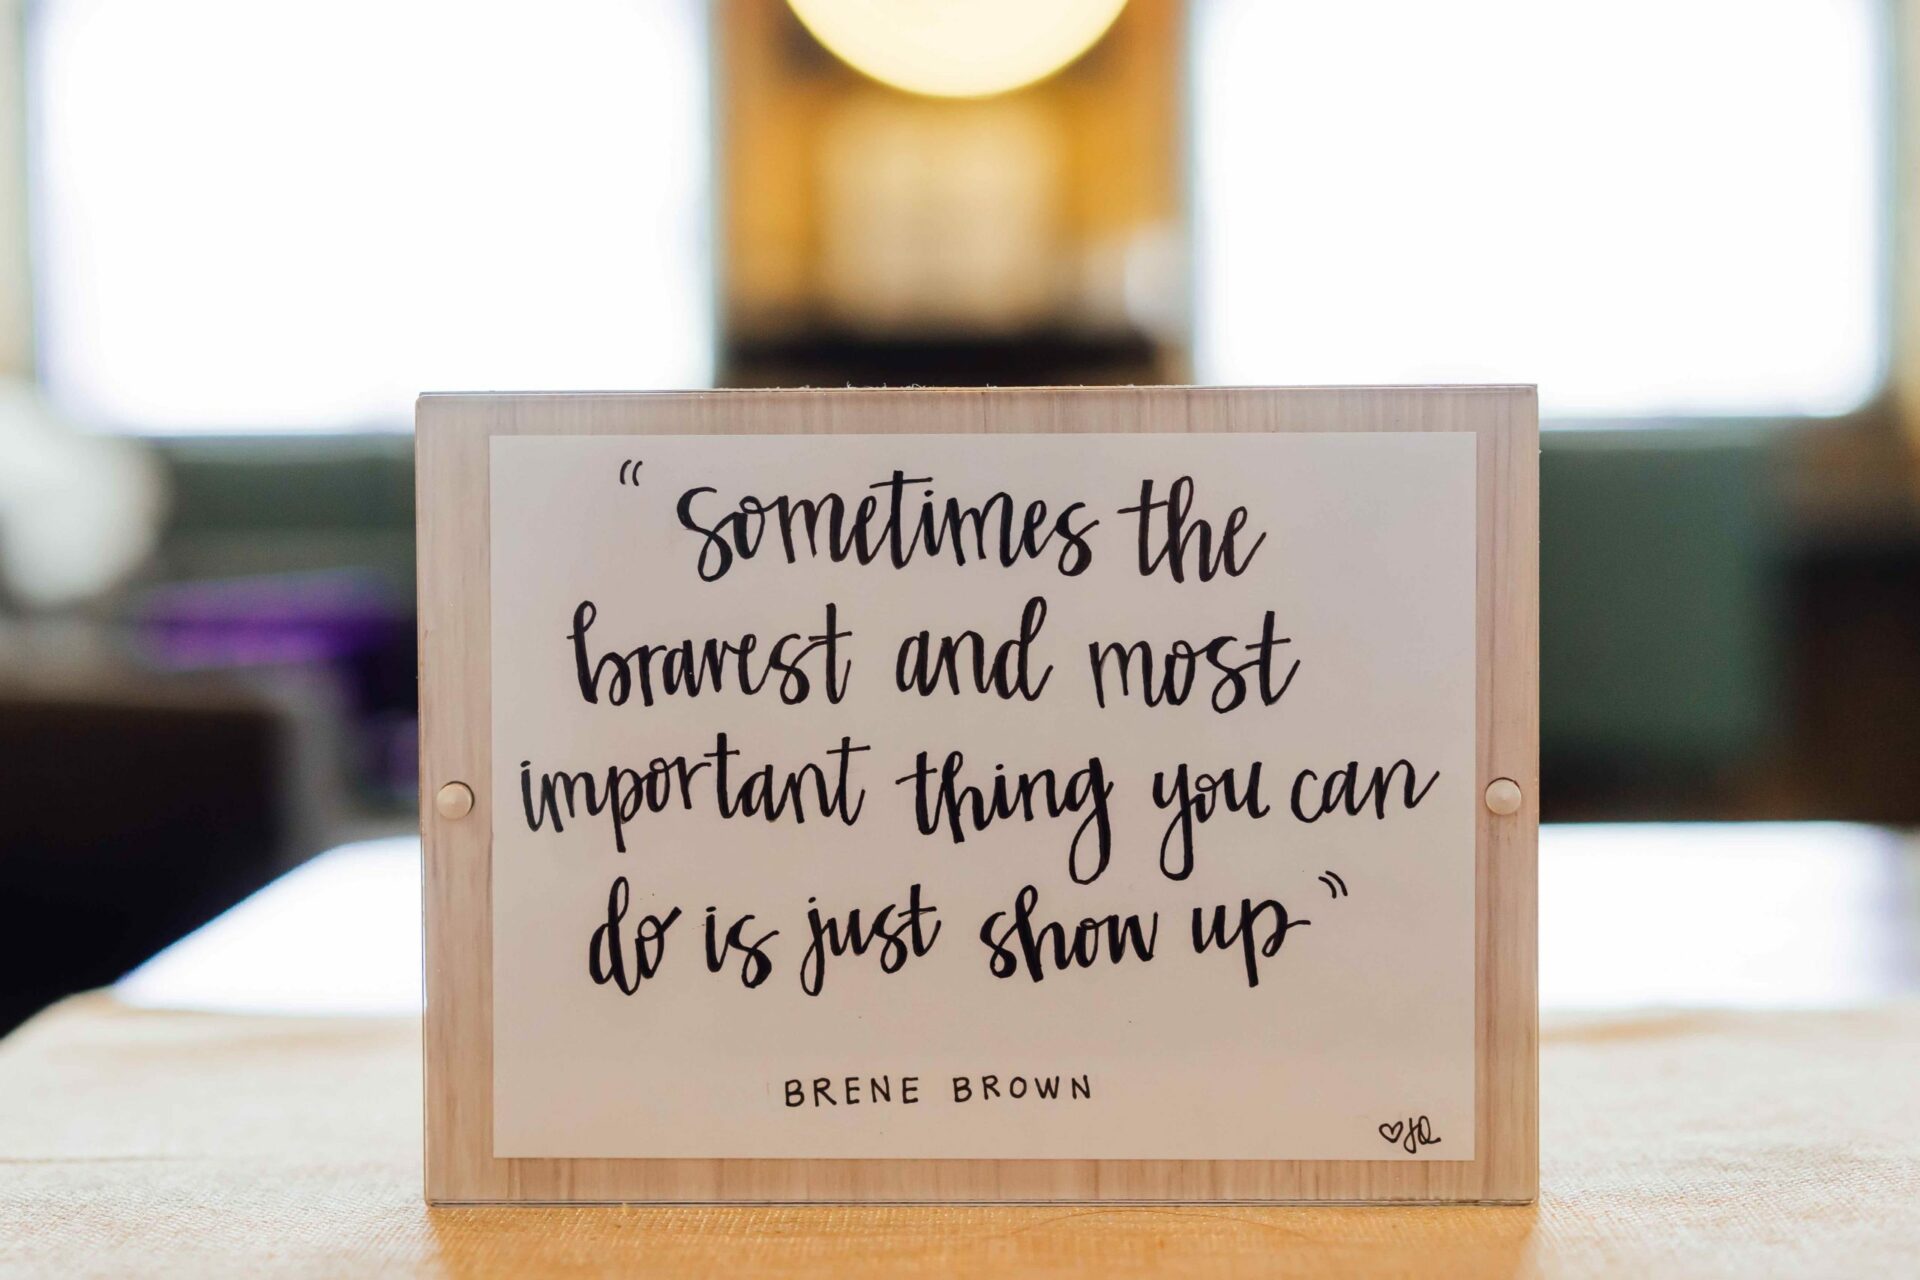 Sometimes the bravest and most important thing you can do is show up. Quote by Brene Brown